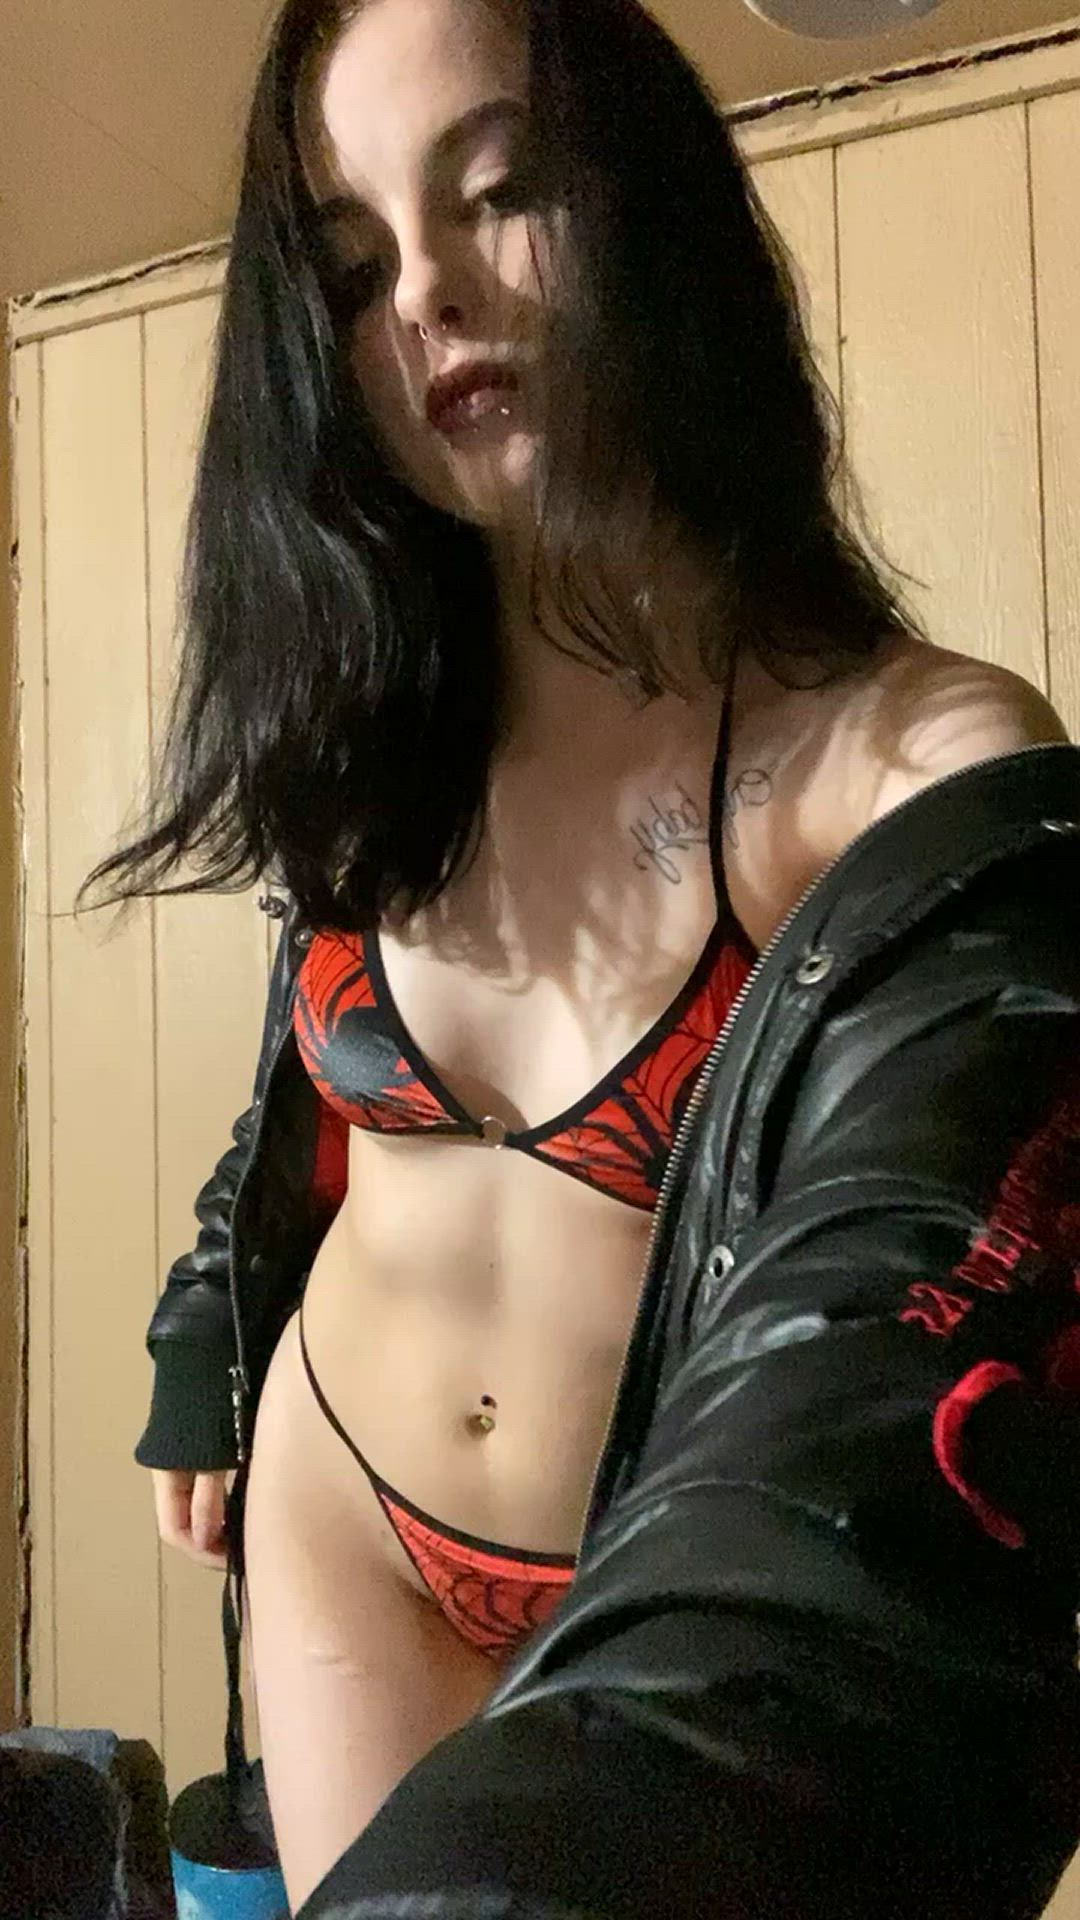 Amateur porn video with onlyfans model kittyvamp <strong>@kitty_vamp</strong>